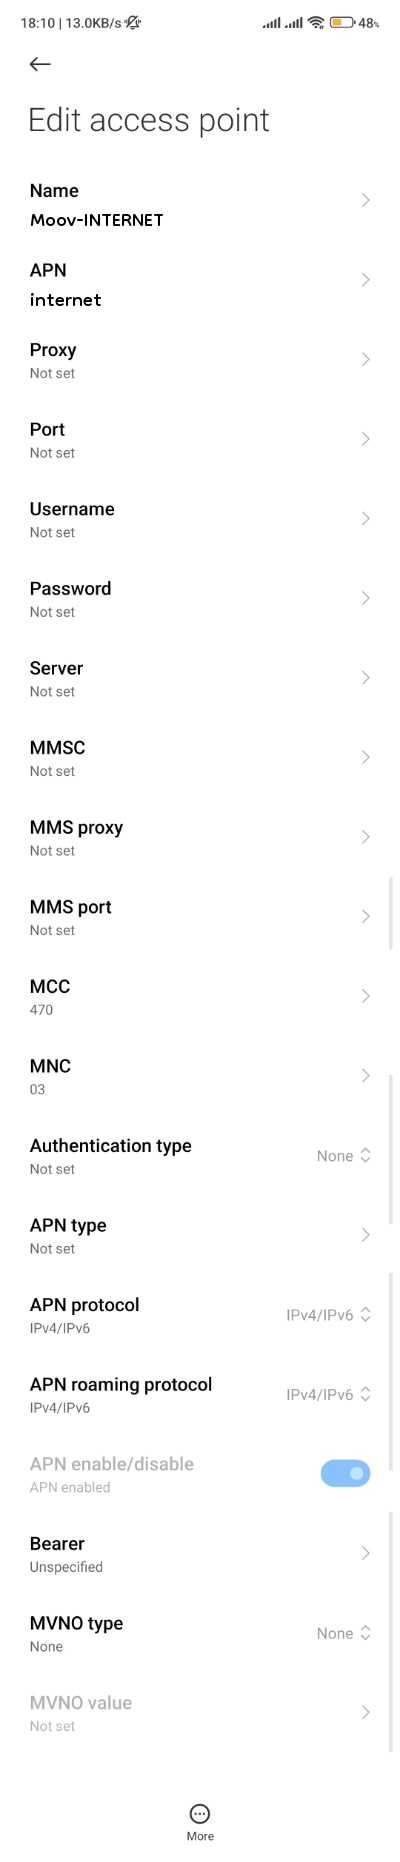 Moov Chad APN Setiings for Android iPhone 3G 4G Internet